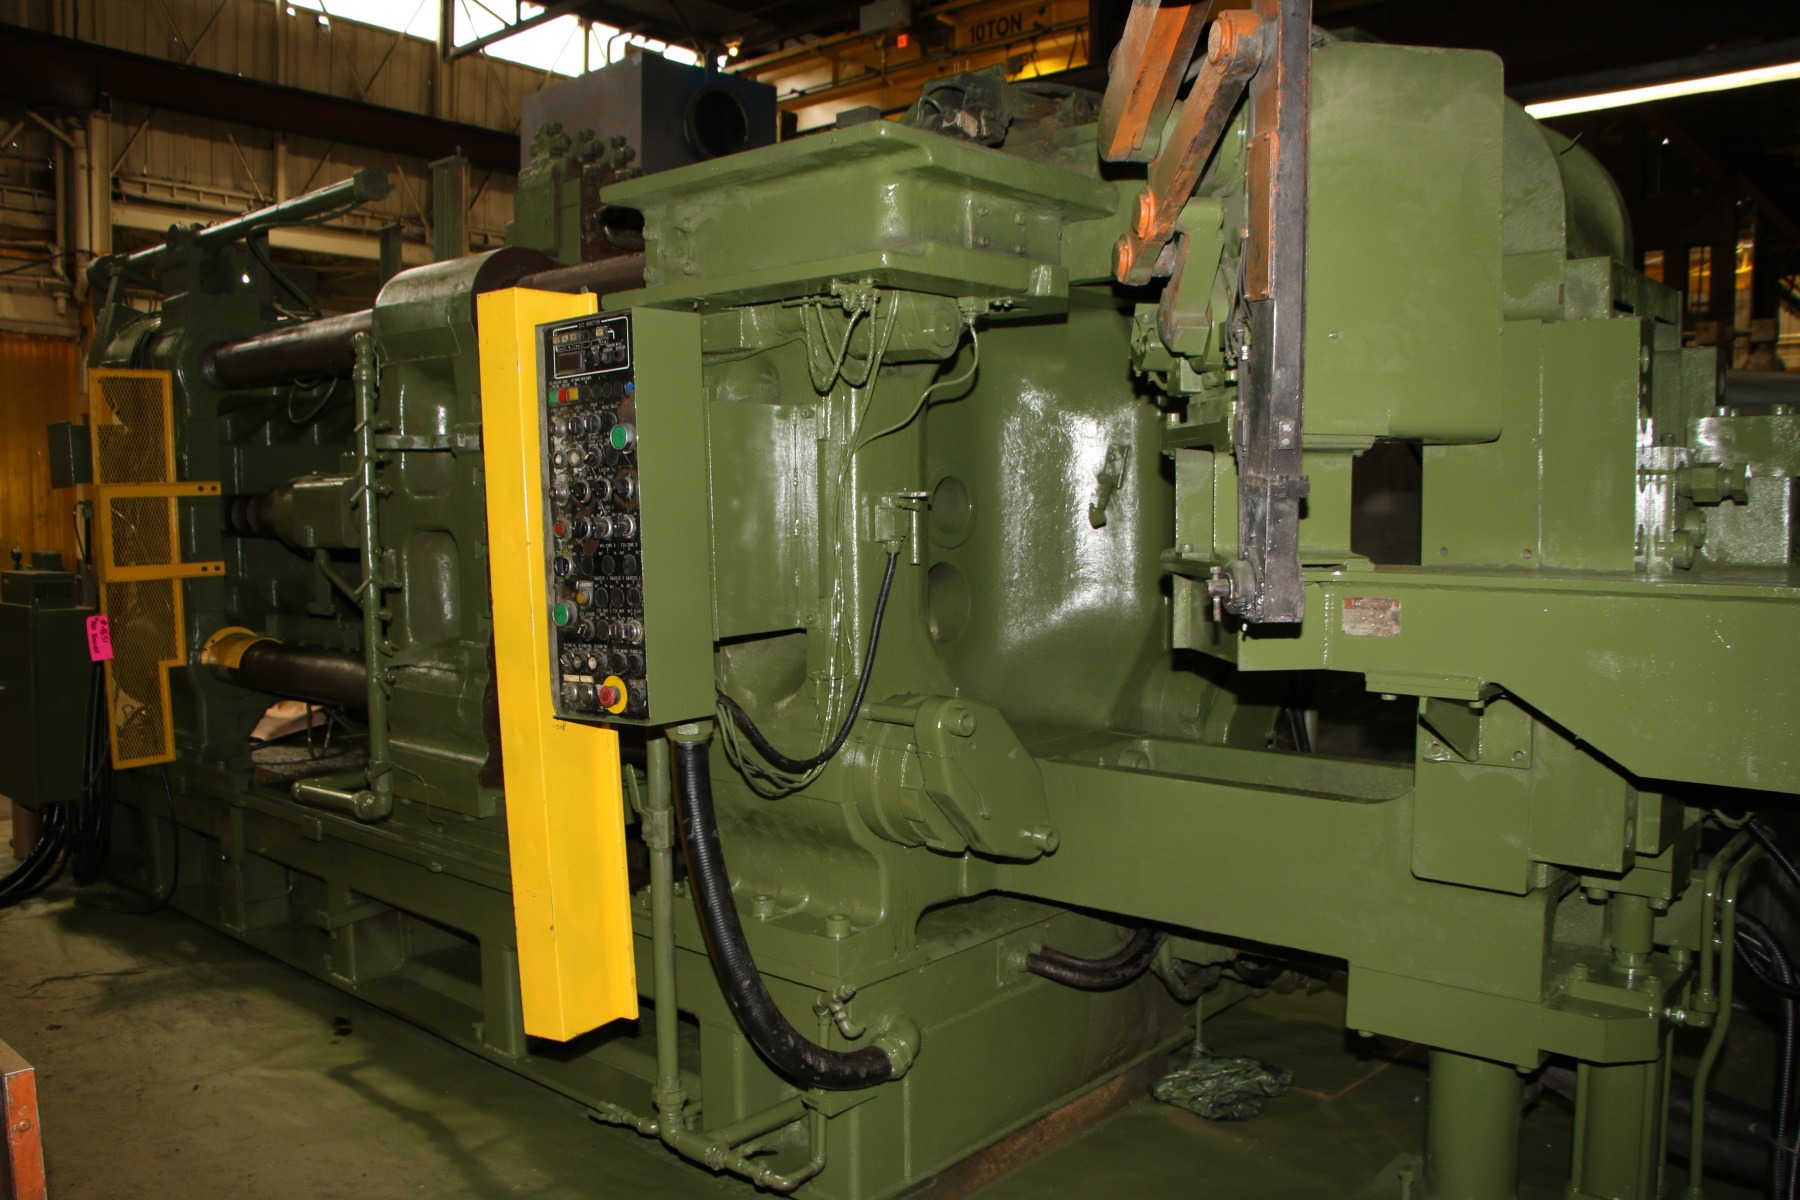 Used Toshiba 800 Ton Cold Chamber Die Casting Machine #4651